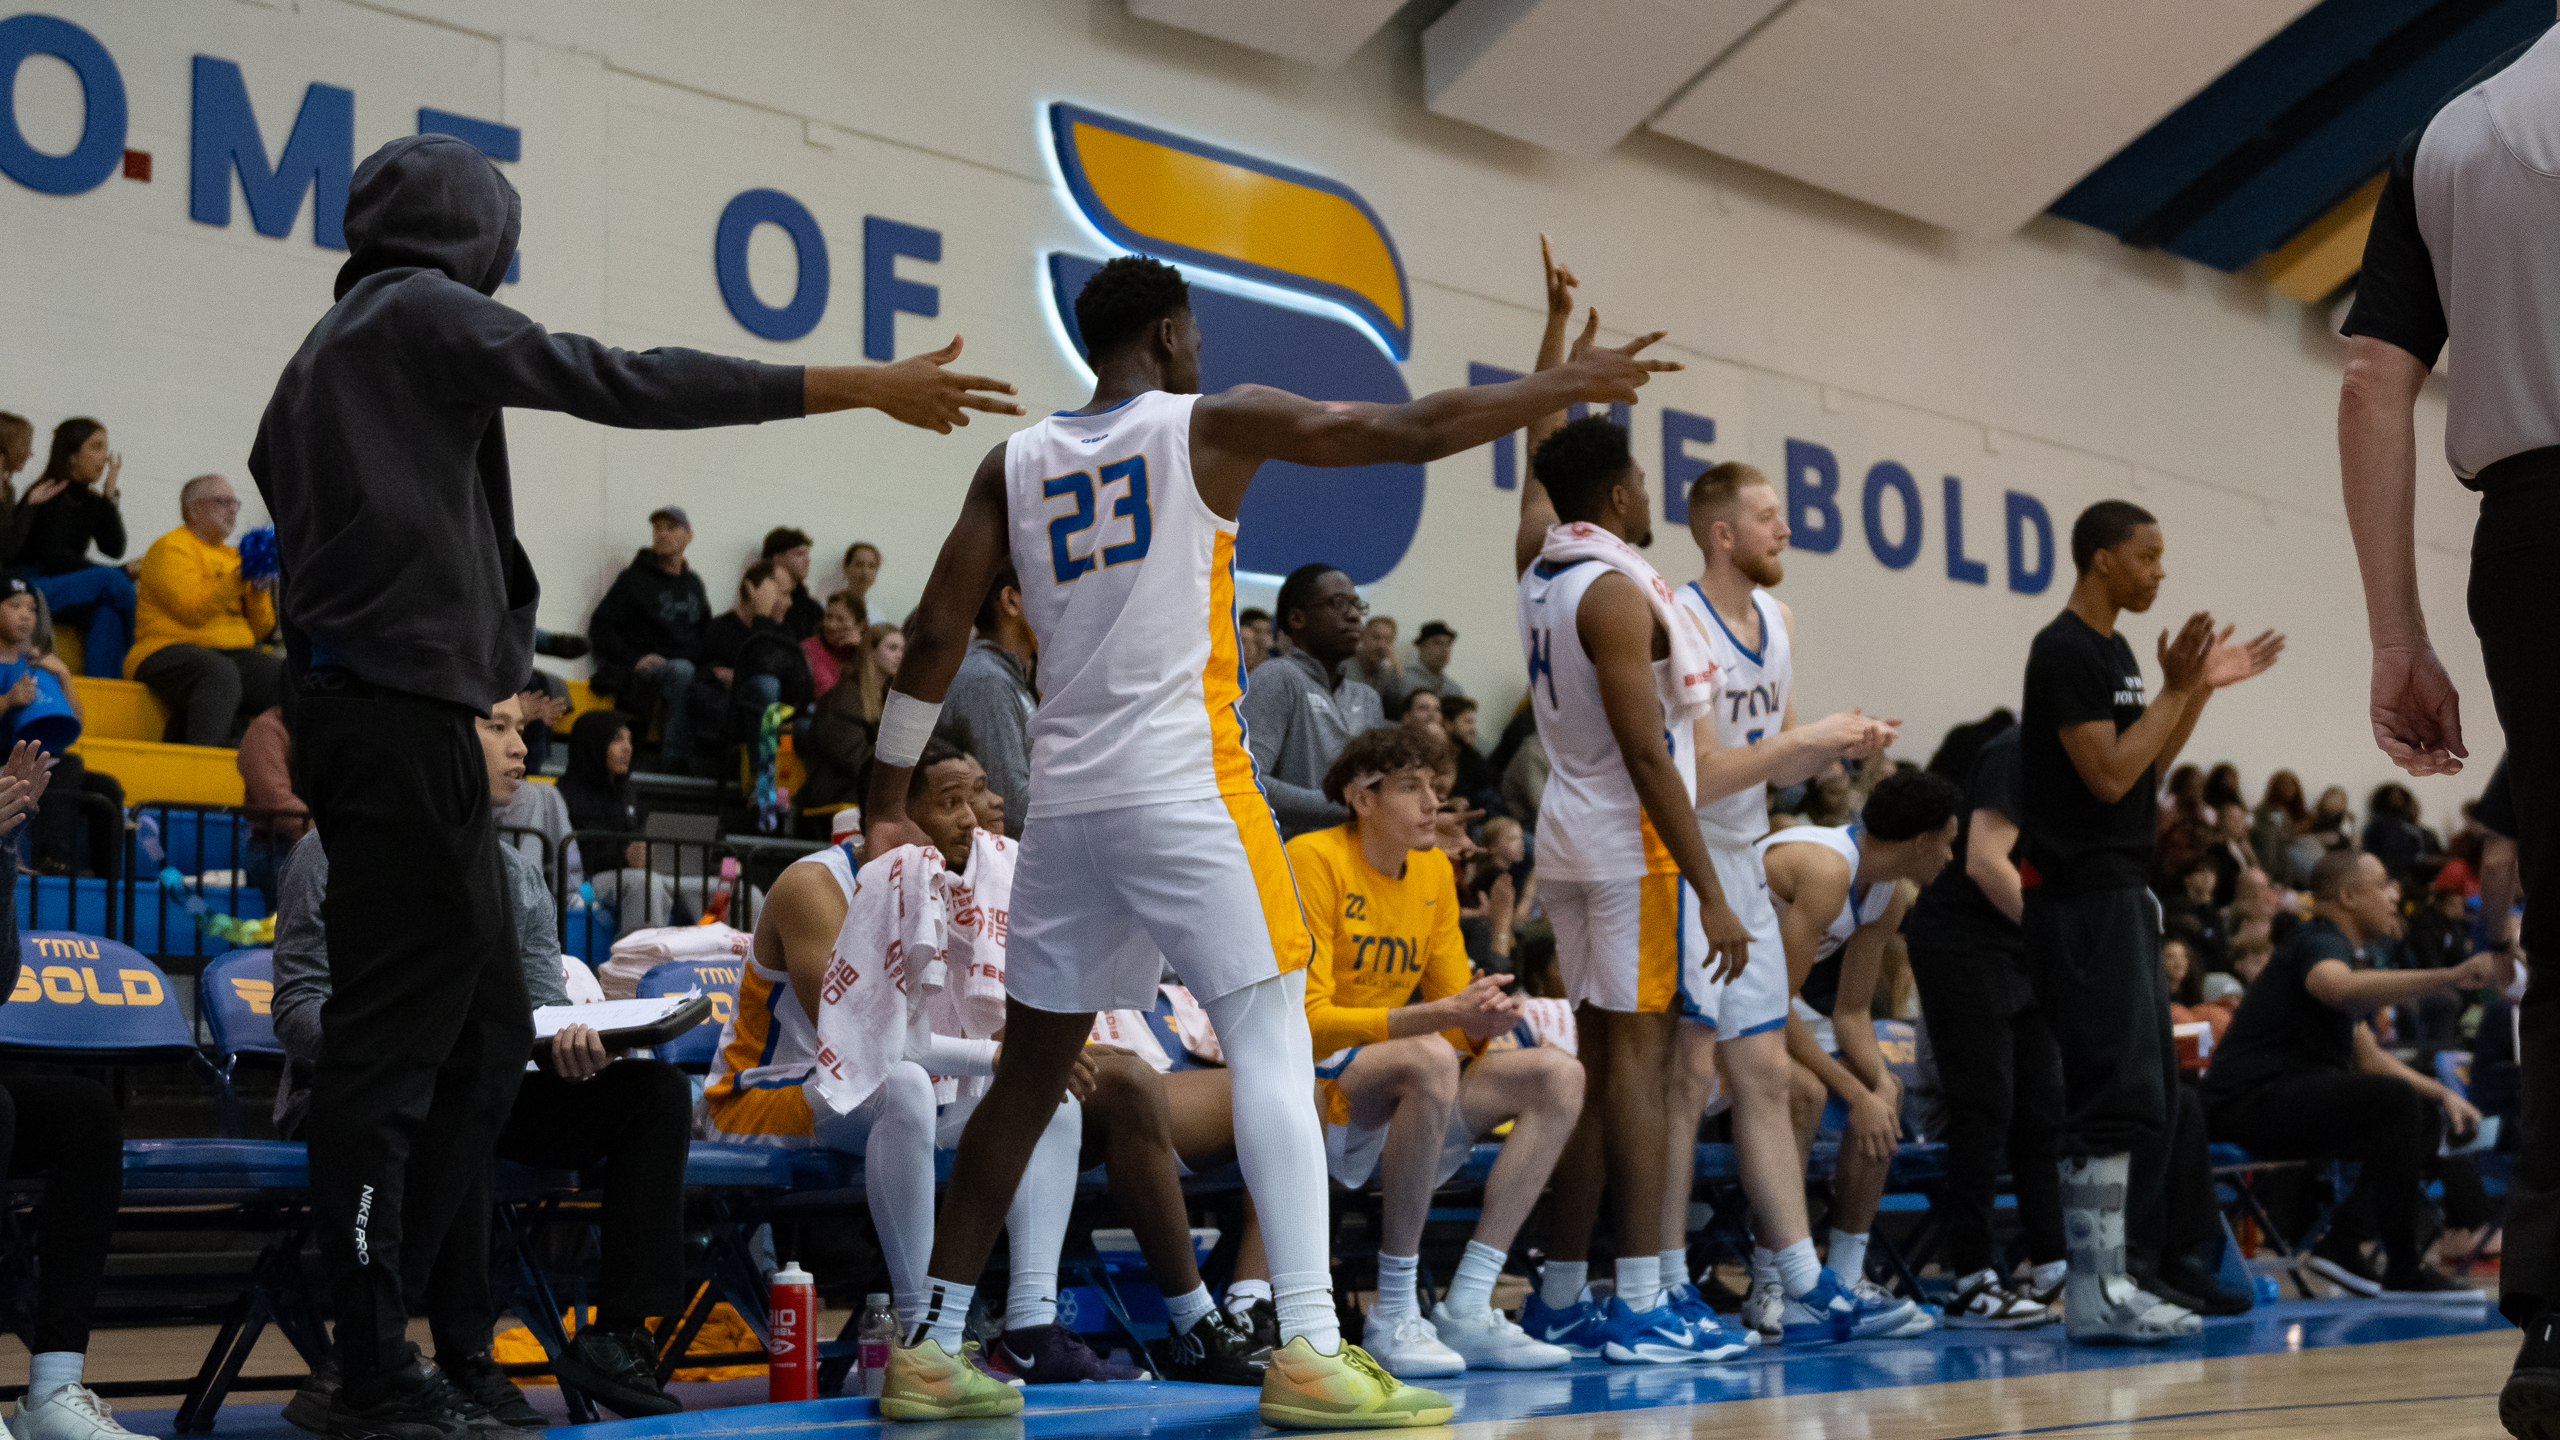 Members of the TMU Bold men's basketball team celebrate a big shot on the bench